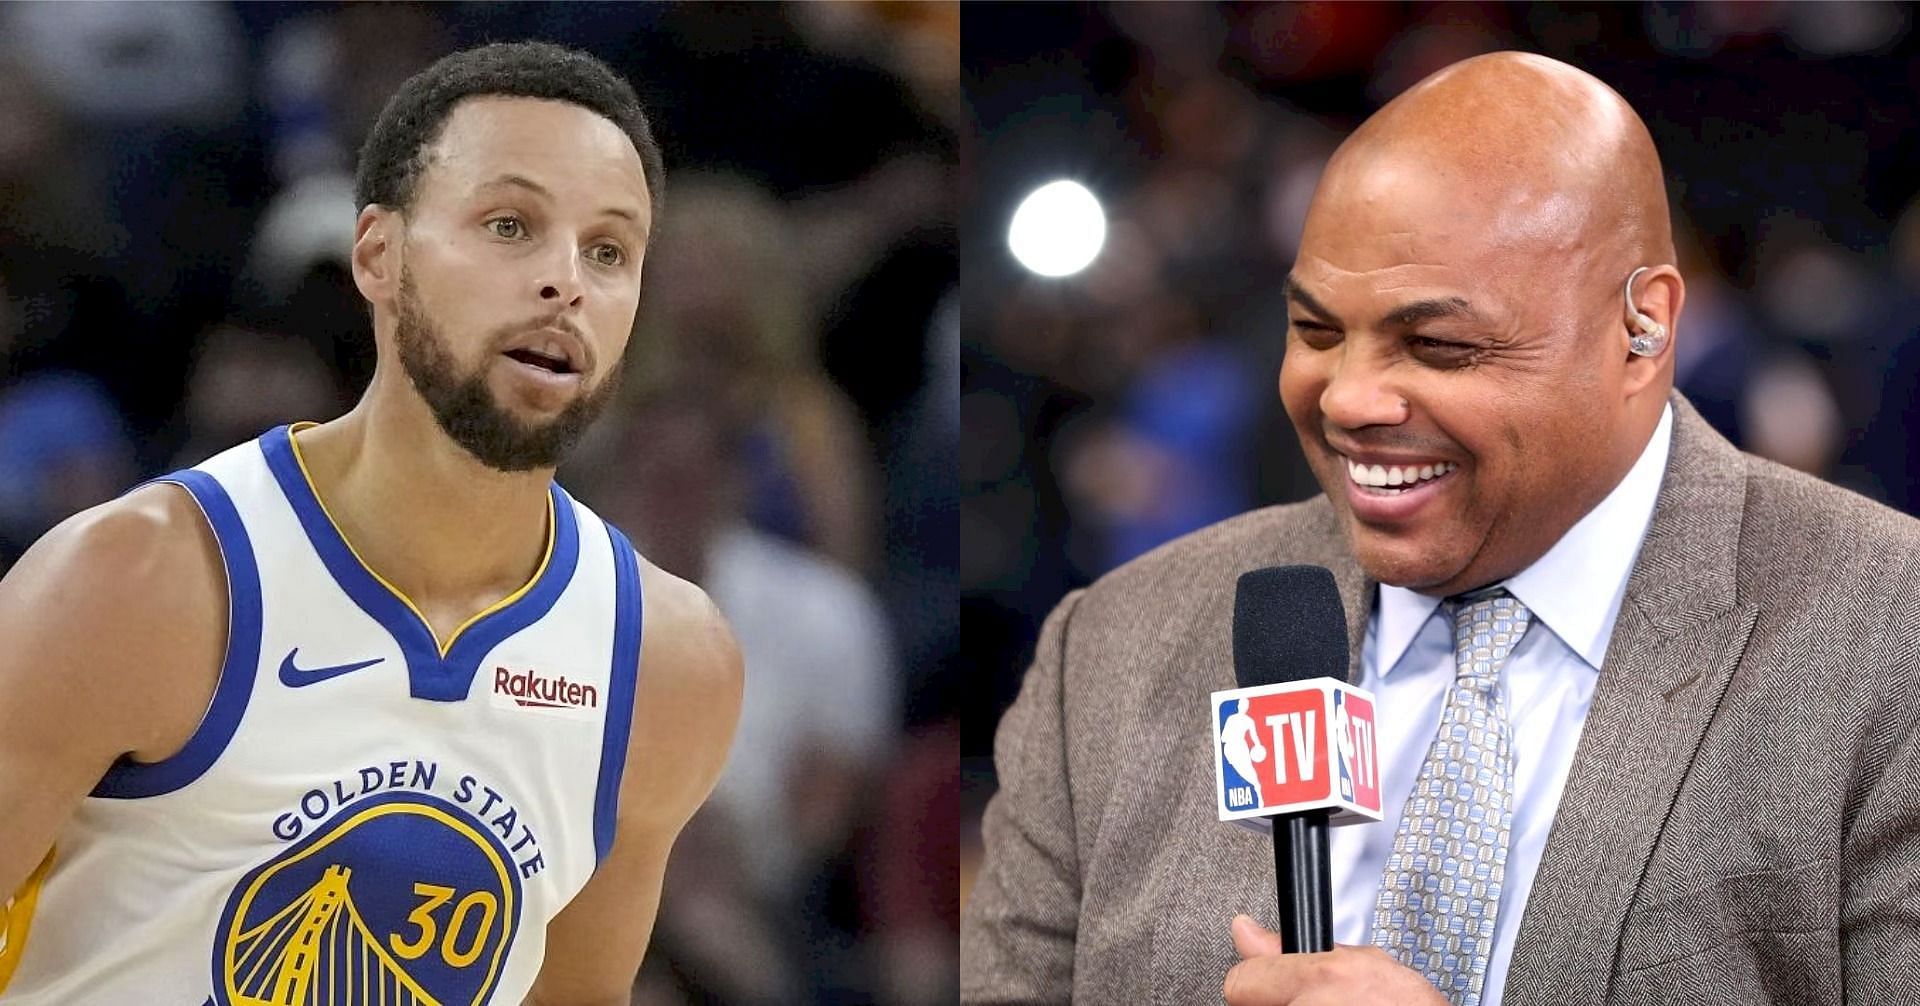 Golden State Warriors superstar point guard Steph Curry and NBA legend-turned-TNT analyst Charles Barkley